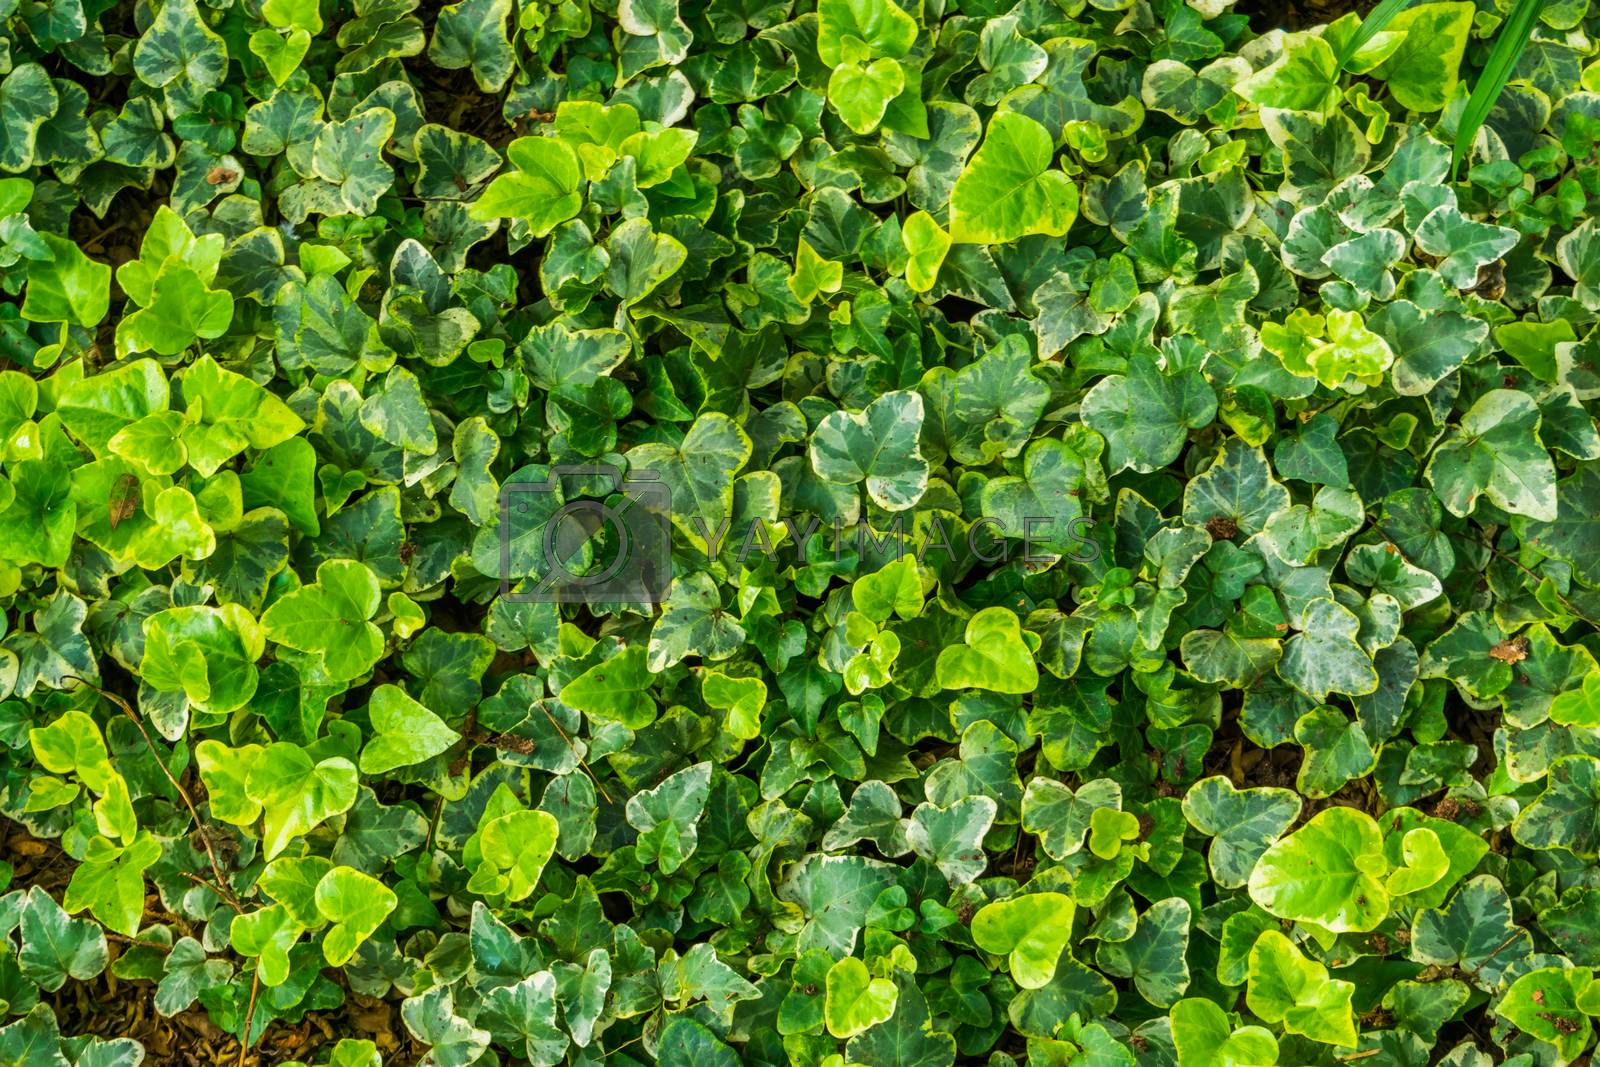 Royalty free image of the leaves of a yellow variegated ivy plant in closeup, special ornamental cultivated specie by charlottebleijenberg